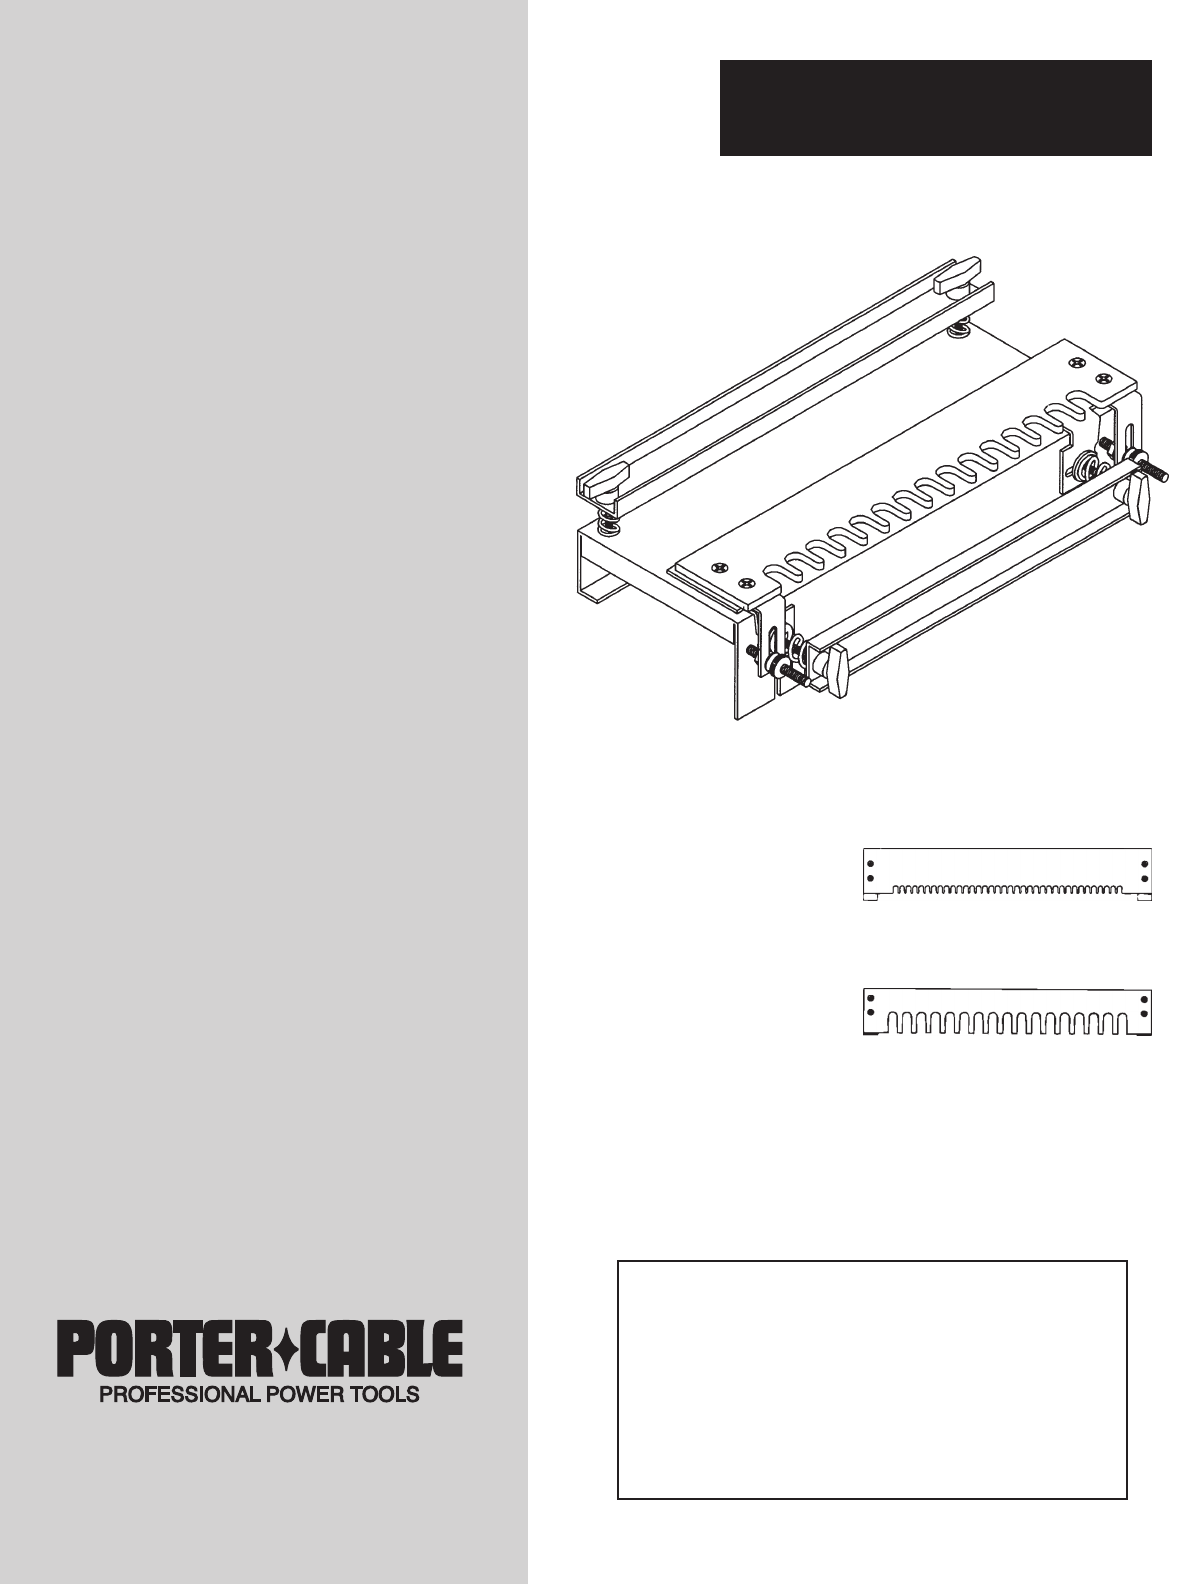 Black And Decker Dovetail Jig Manual